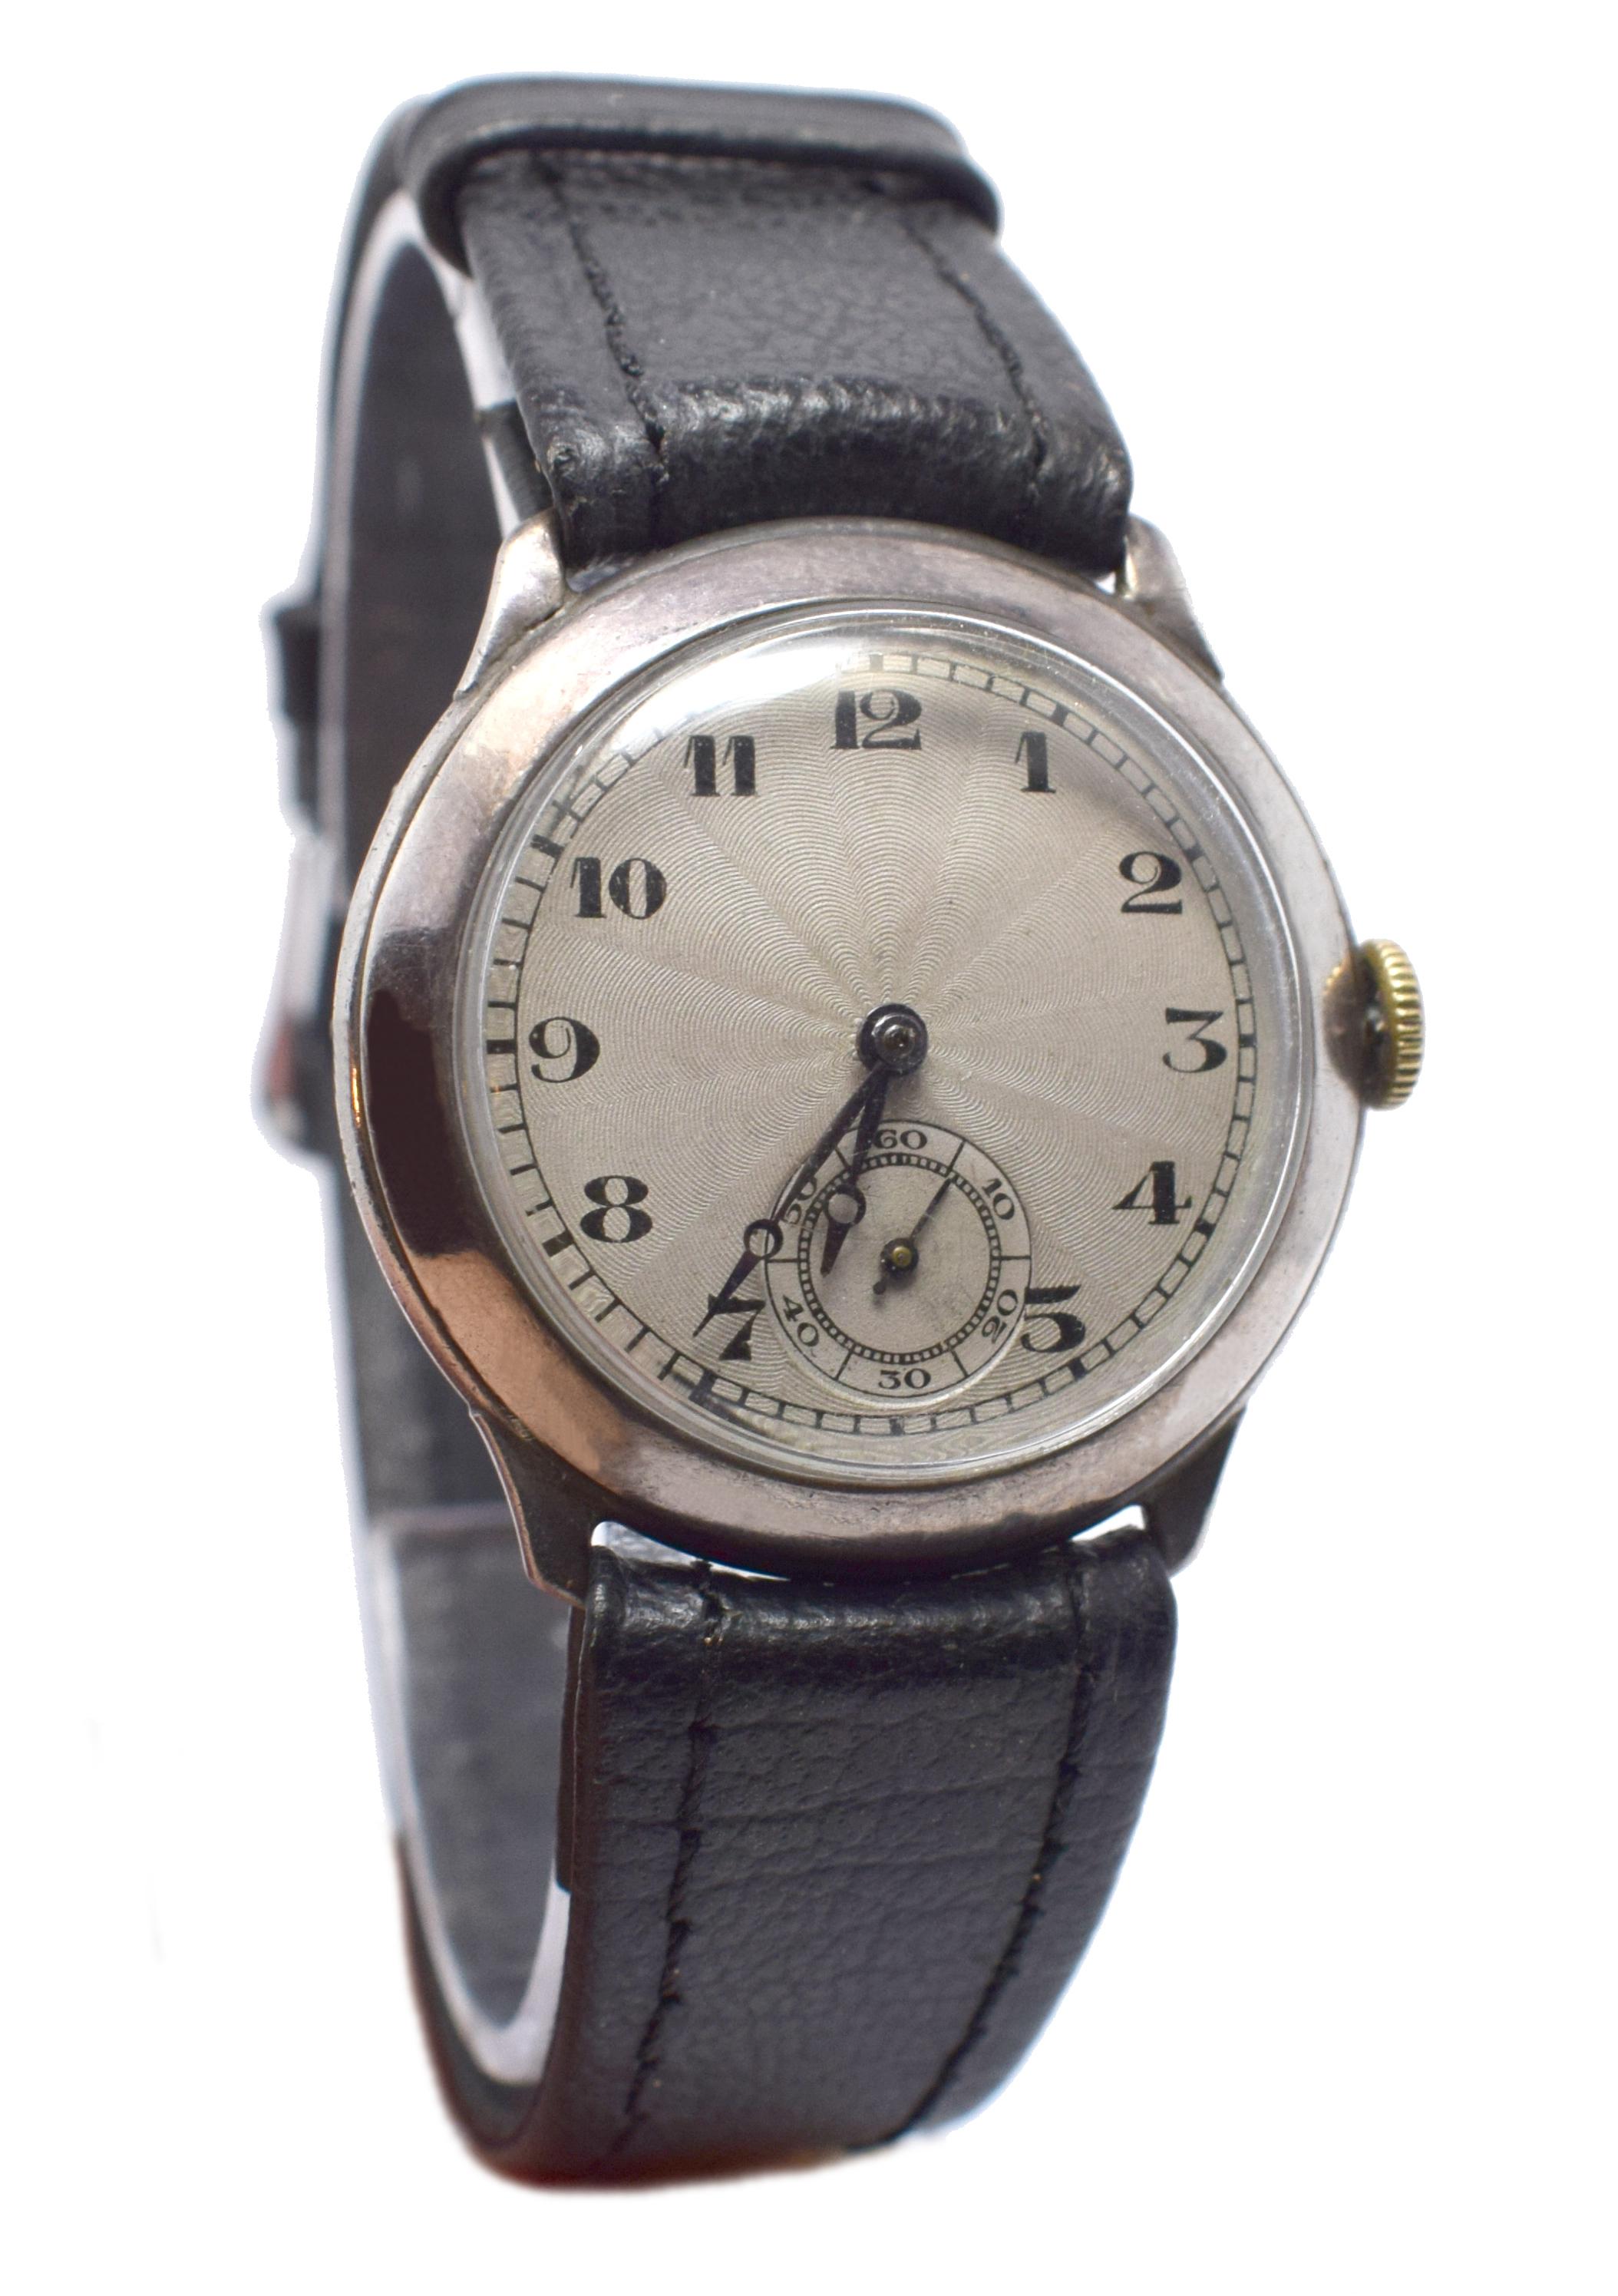 Very attractive and original 1930's gents wrist watch. The guilloche (silvered engine turned) dial has black Arabic numerals with a subsidiary seconds dial.  Serviced and keeping good time, a new leather strap has been added. Ideal for day and